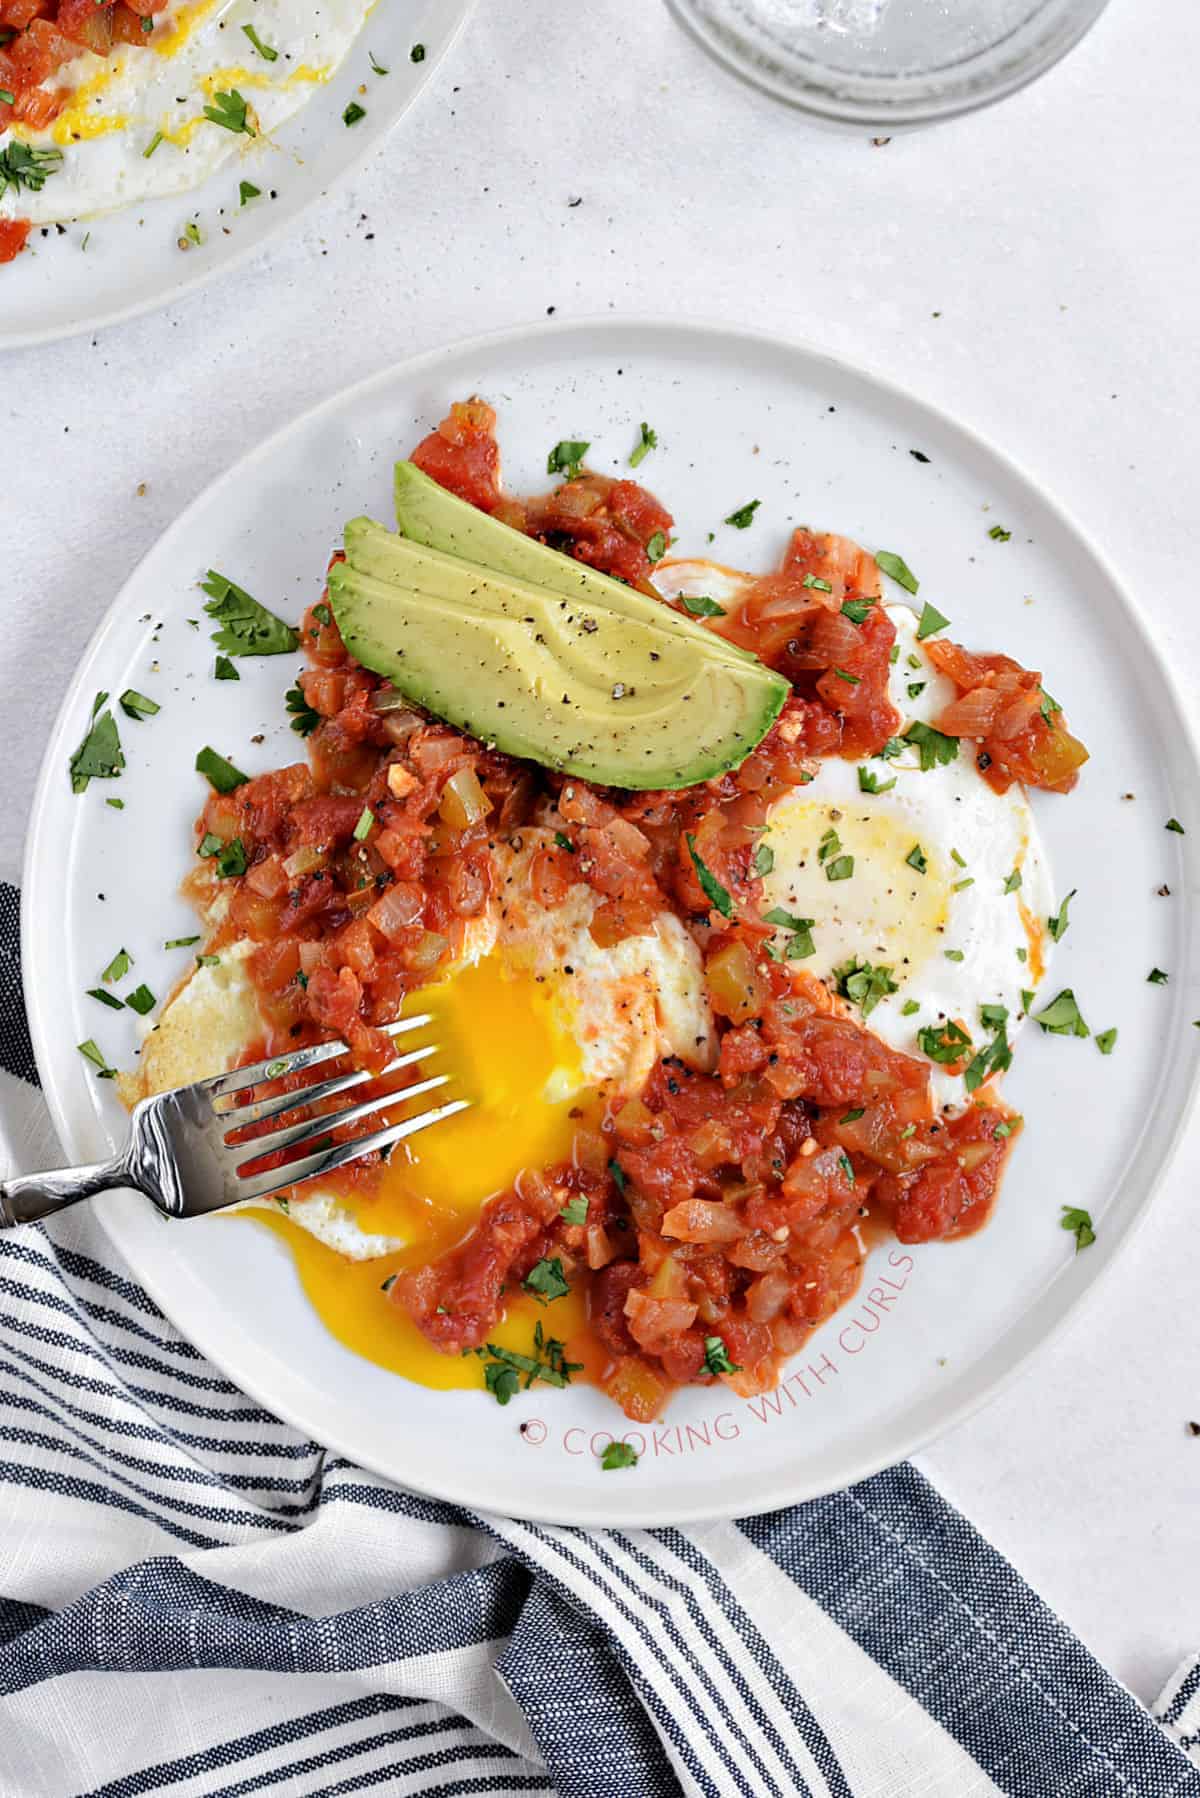 Two fried eggs, one broken open, cooked tomato salsa, and sliced avocado on a small plate.